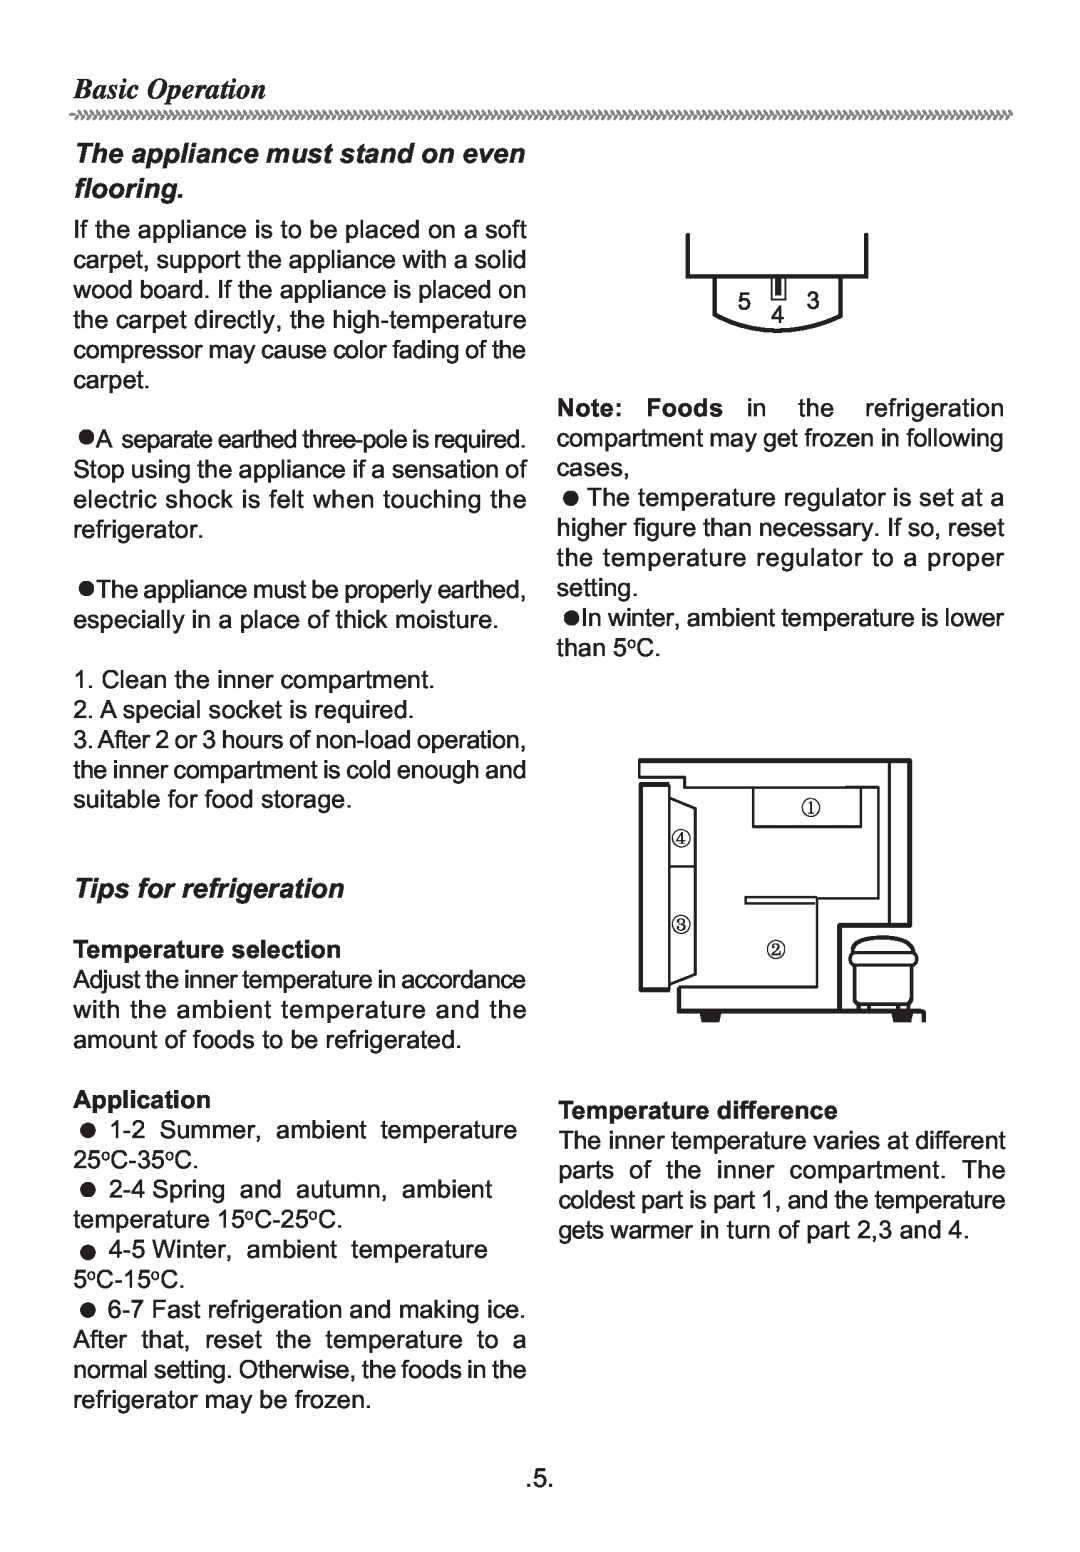 Haier HR-60A Basic Operation, The appliance must stand on even flooring, Tips for refrigeration, Temperature selection 